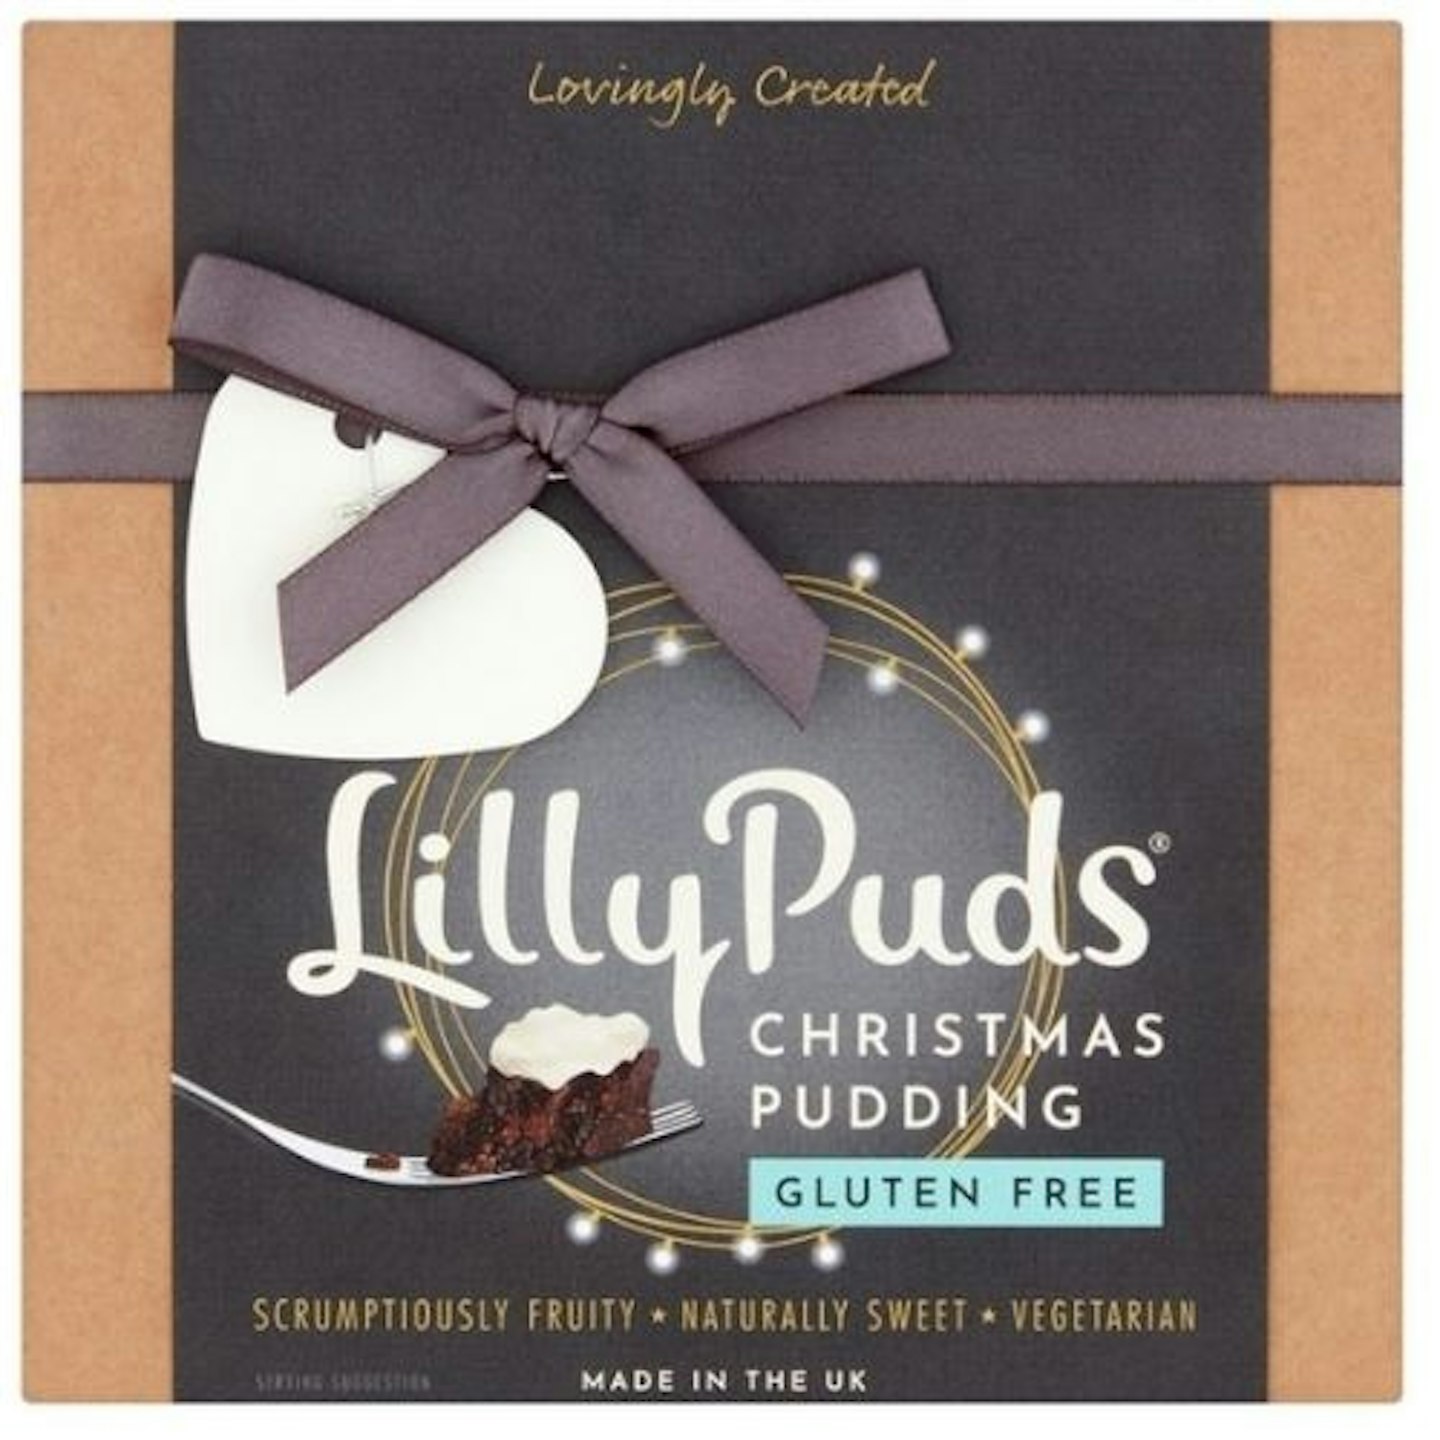 LillyPuds Gluten Free Christmas Pudding